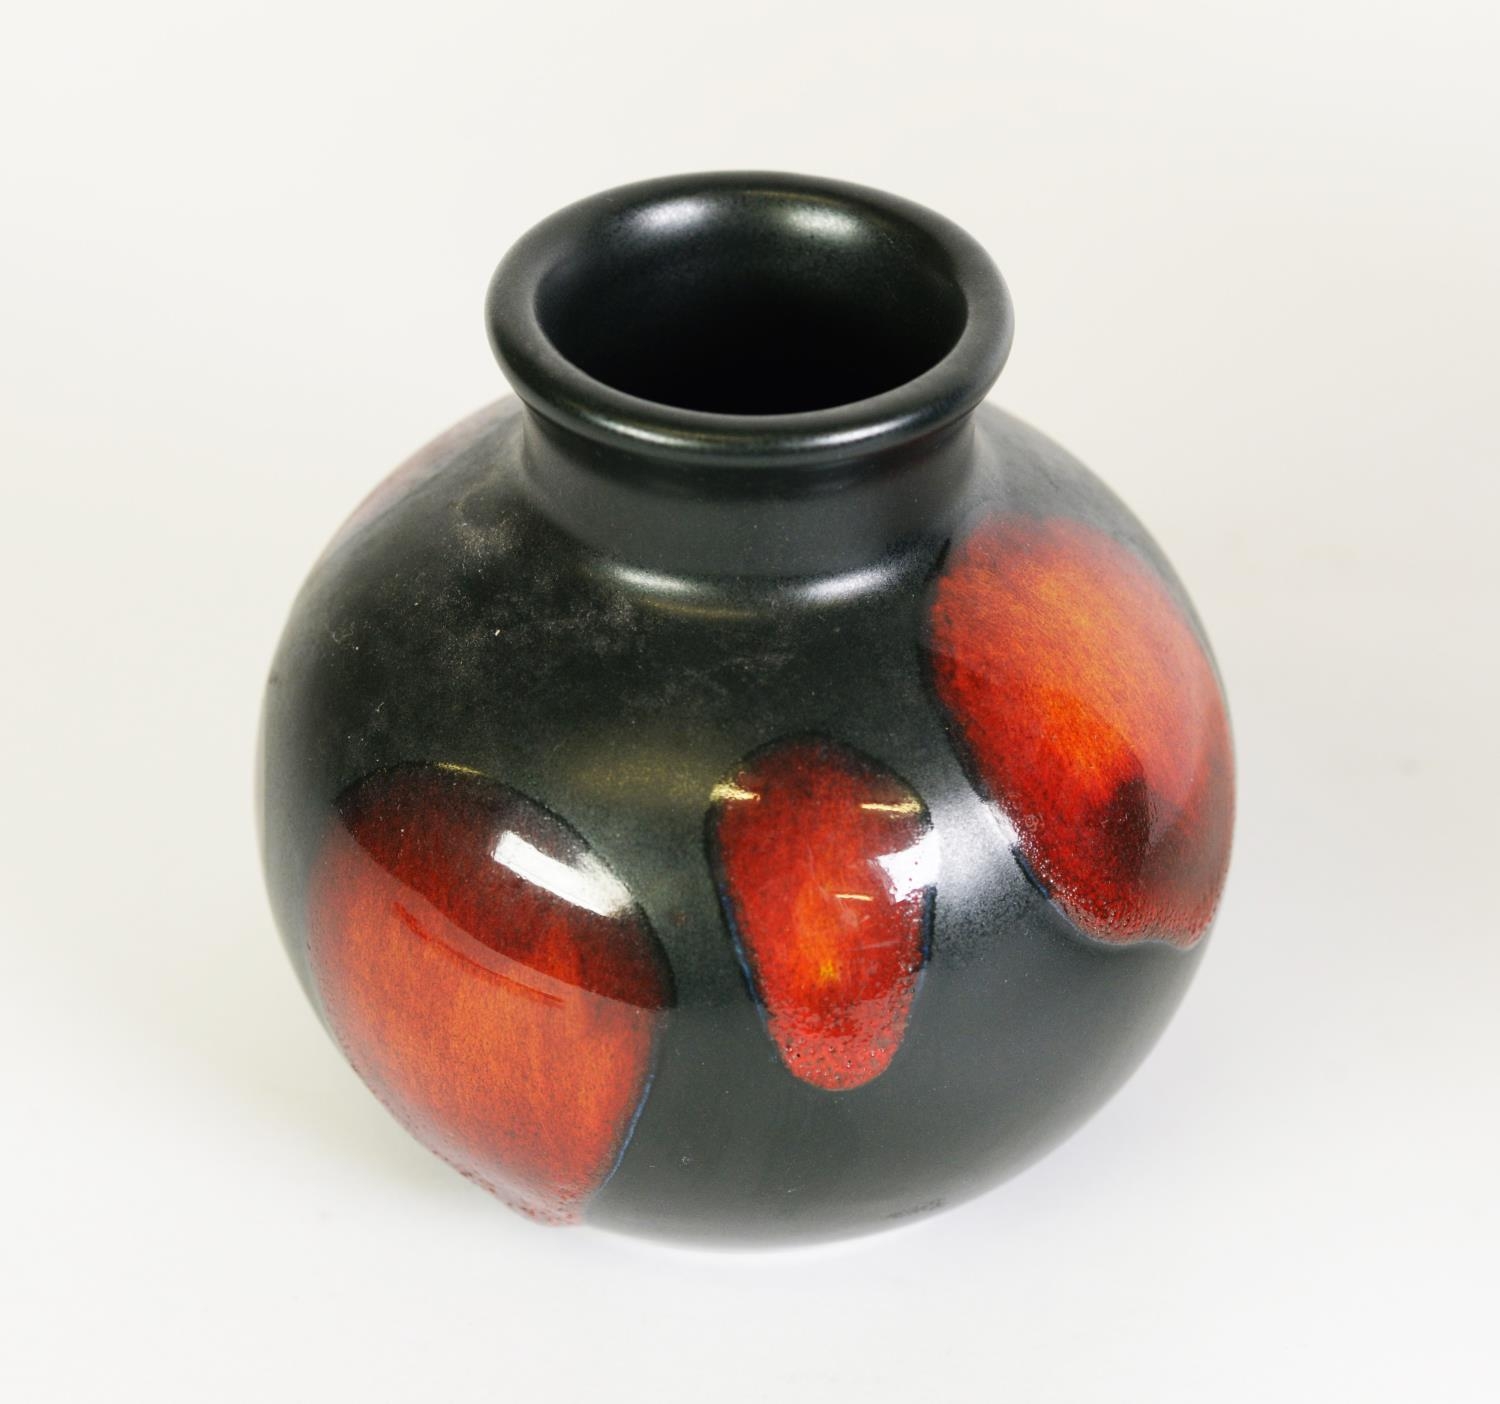 REGAL WARE CHINA GINGER JAR AND COVER, of typical form, glazed in mottled and running tones of - Image 3 of 3